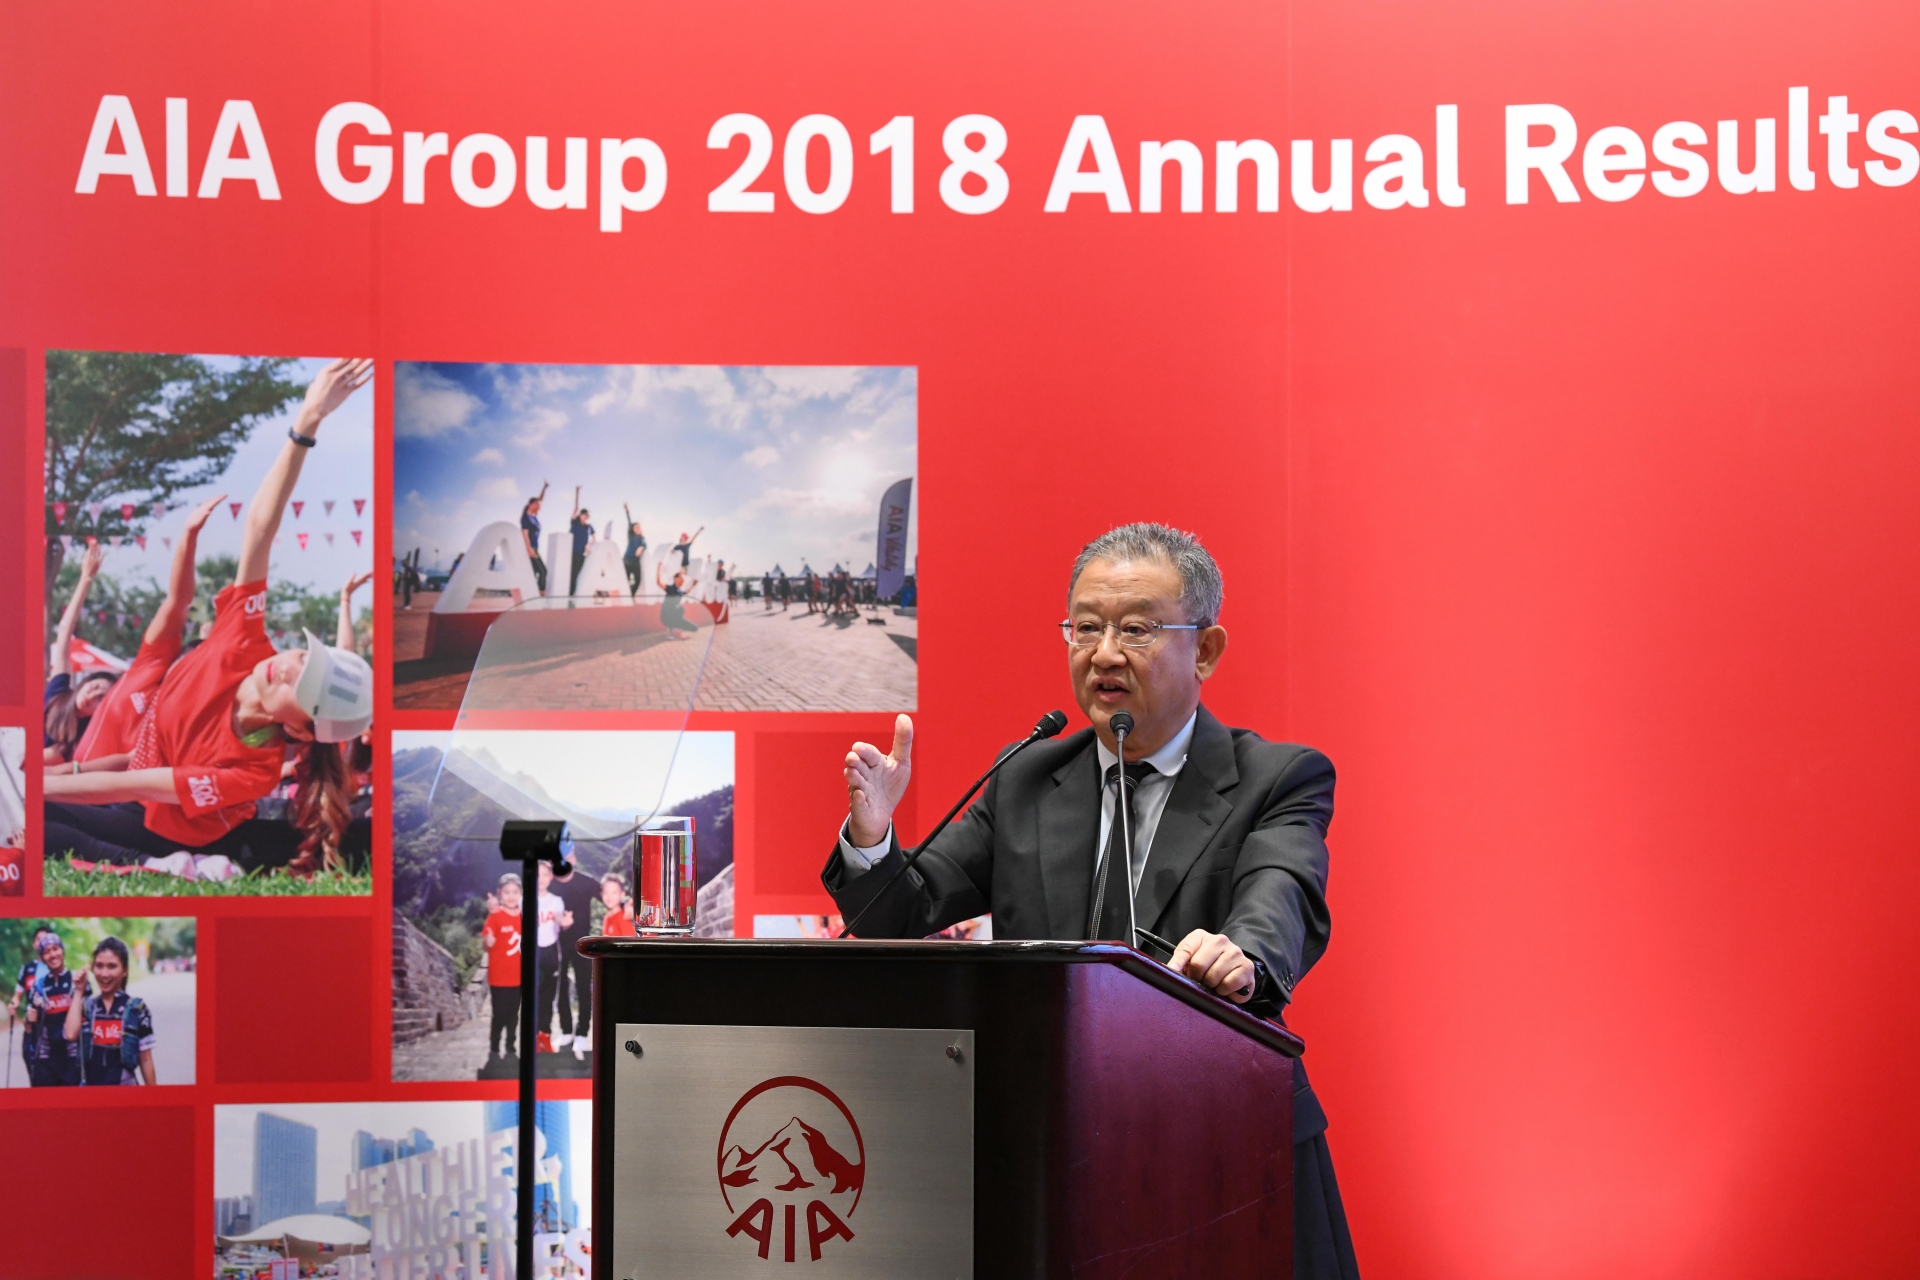 AIA delivered an excellent performance in 2018